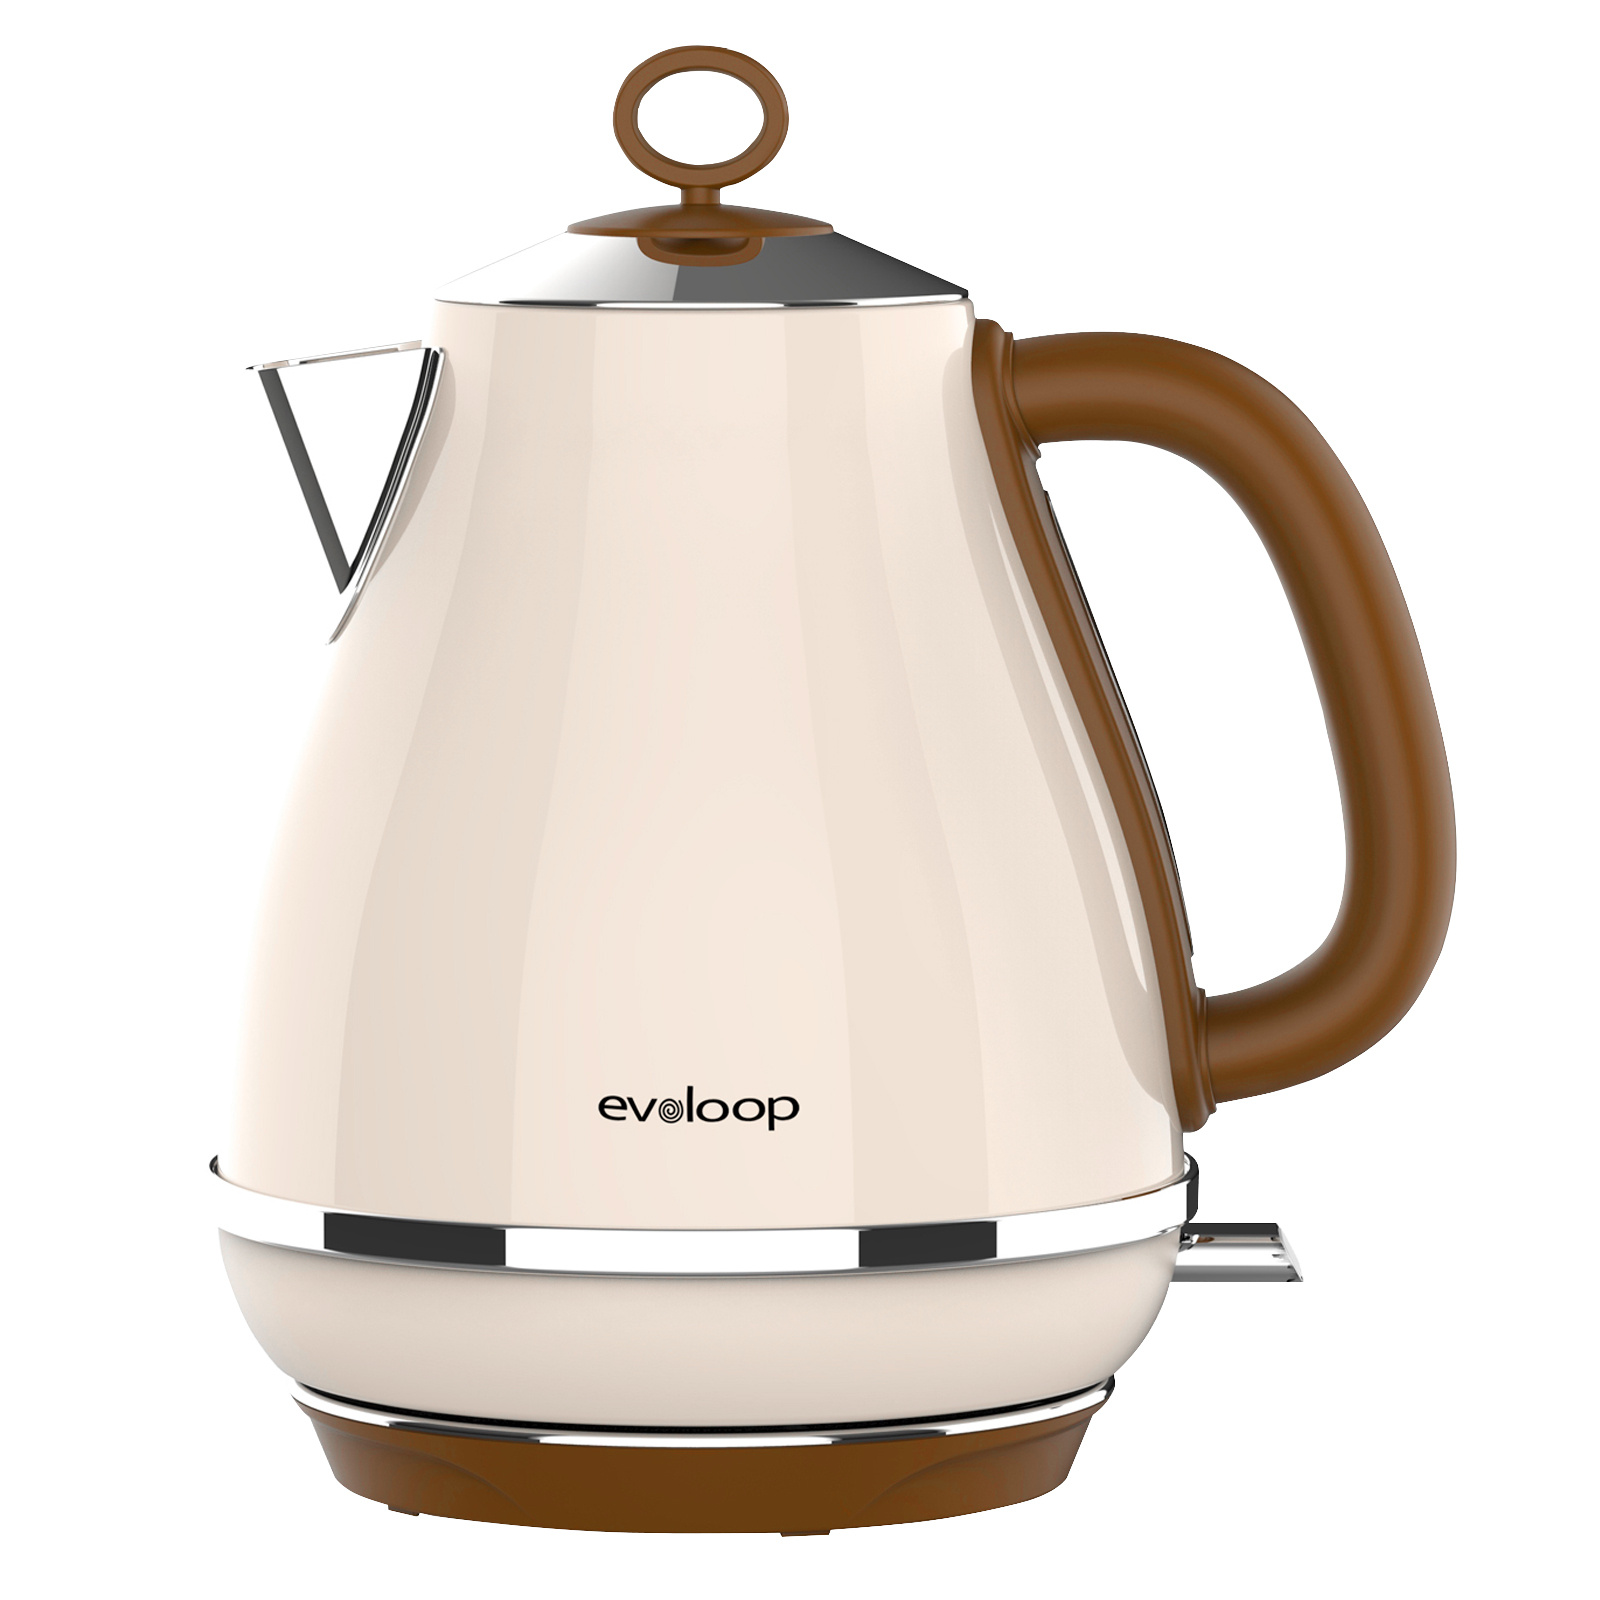 brew the perfect cup of tea with this 1 7l electric kettle bpa free auto shut off boil dry protection 120v 1500w details 7